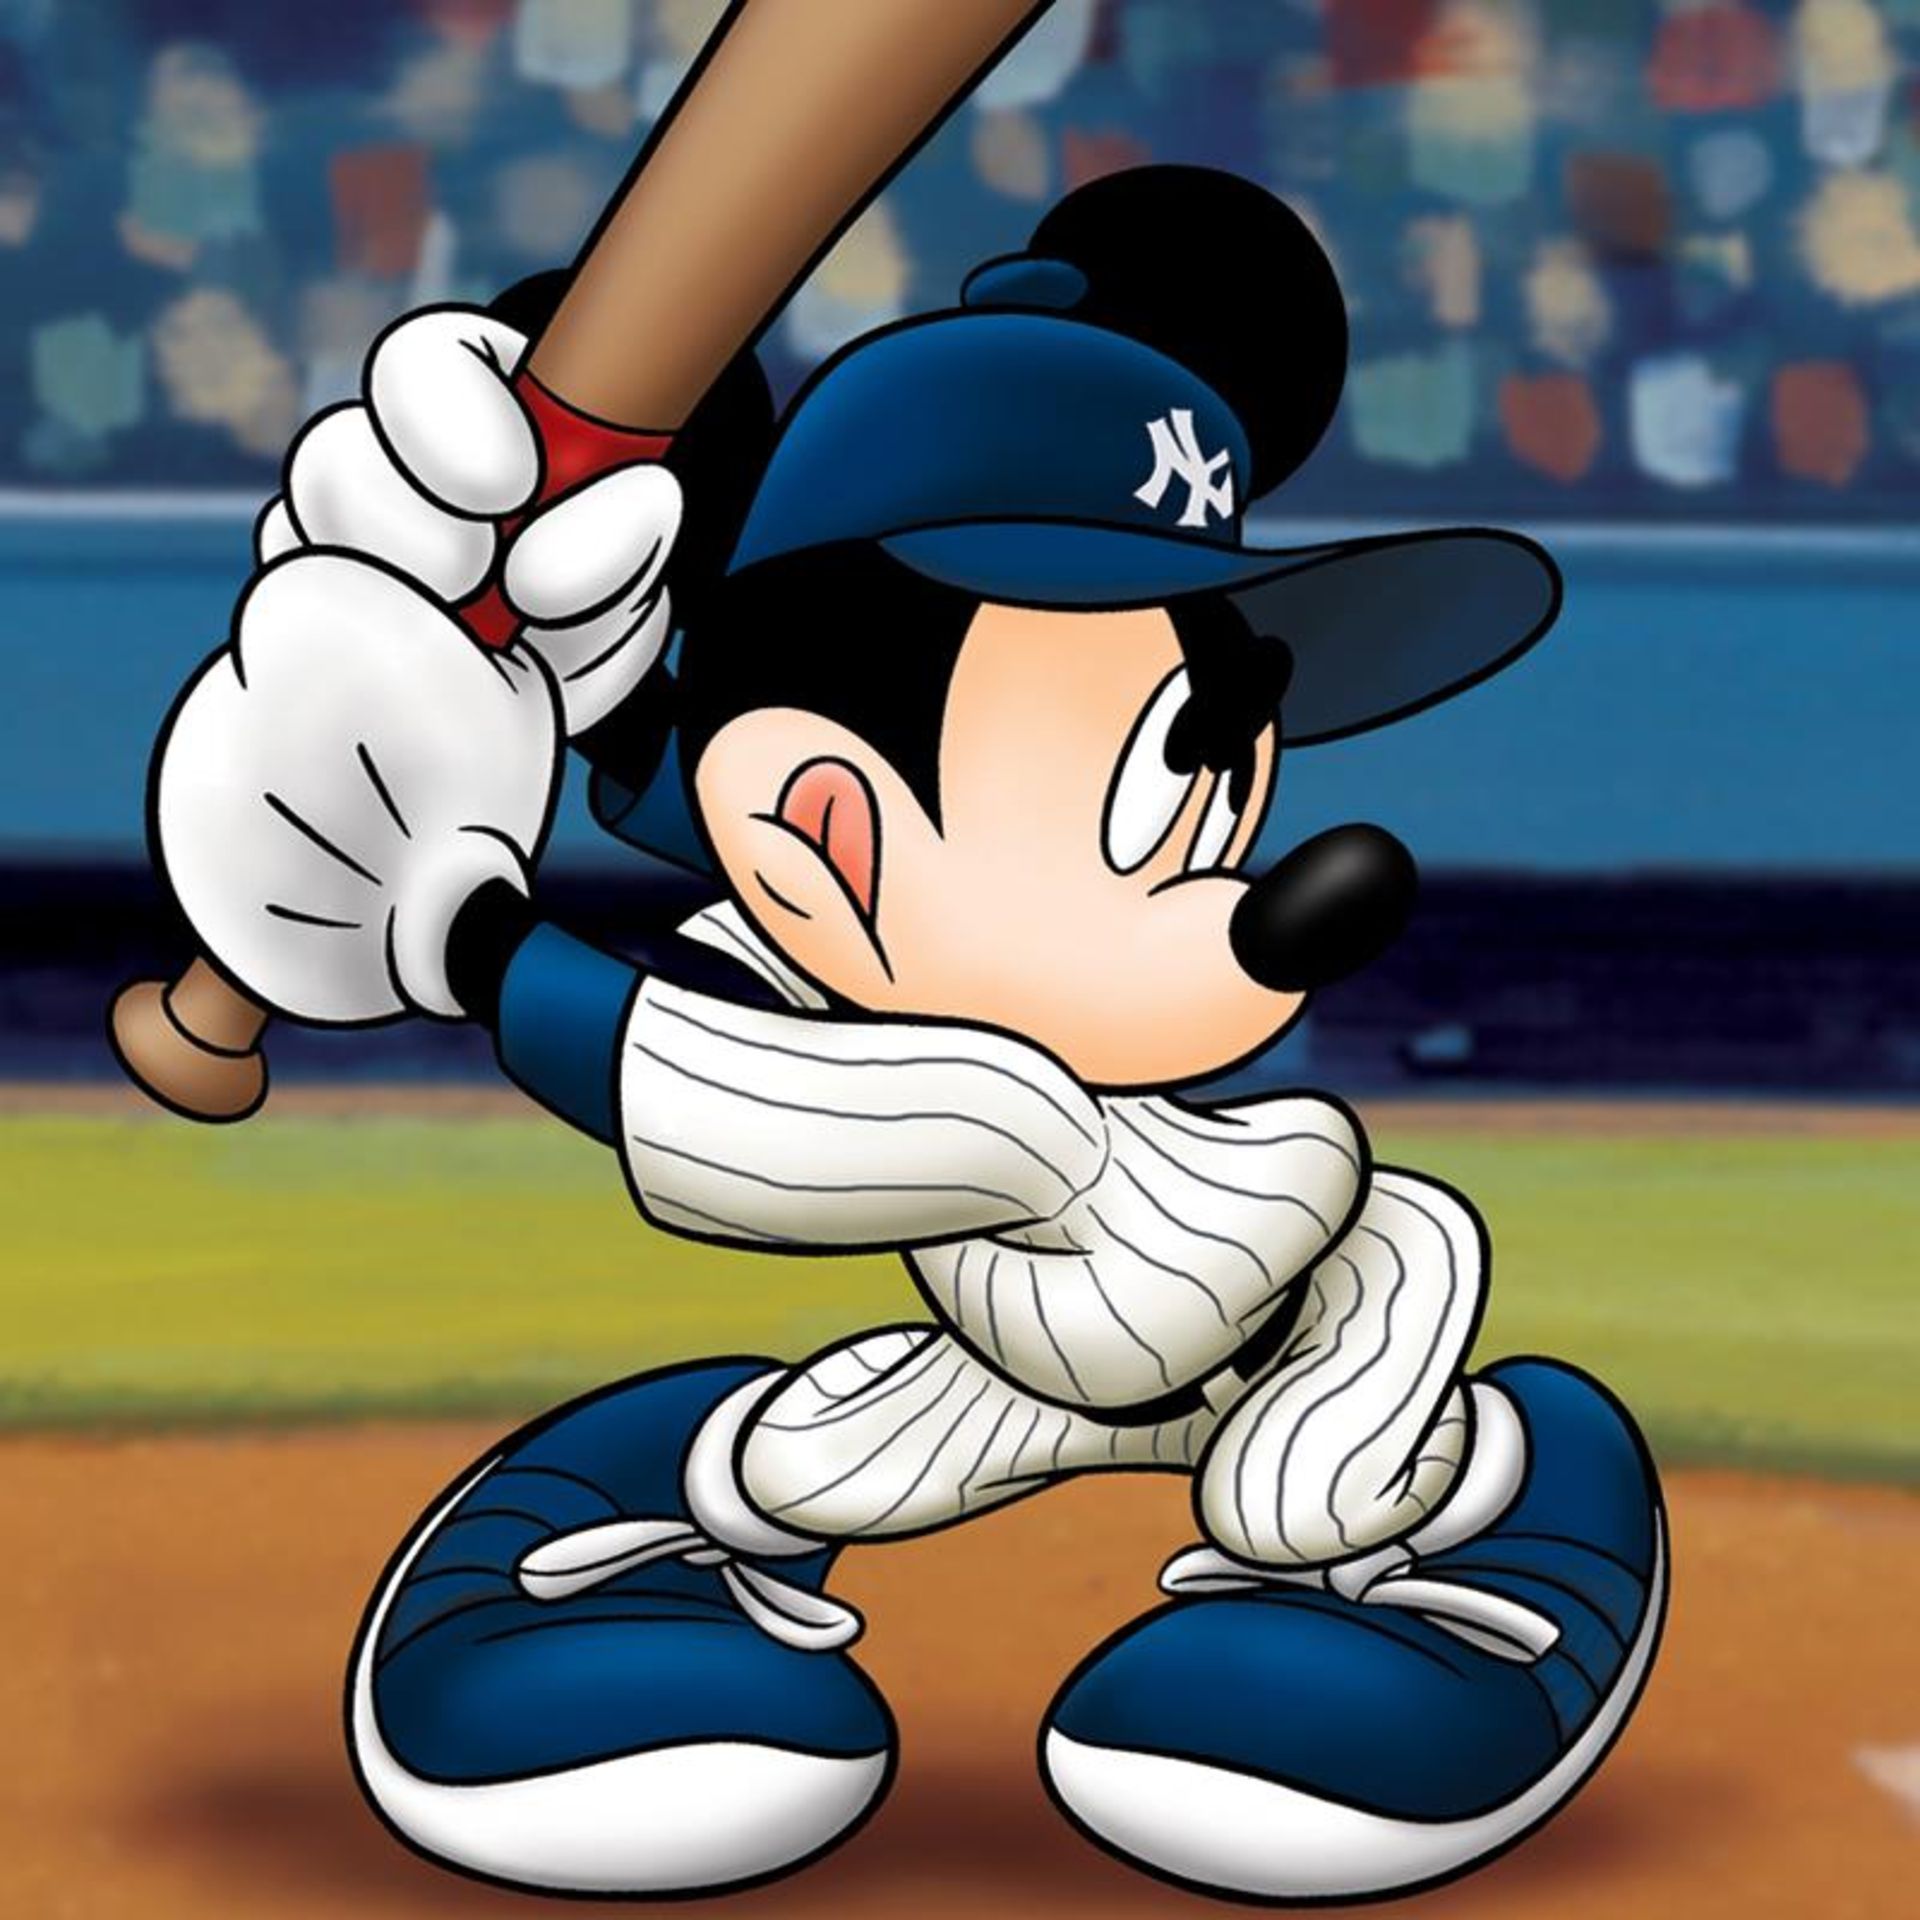 "Mickey at the Plate (Yankees)" Numbered Limited Edition Giclee licensed by Disn - Image 2 of 2